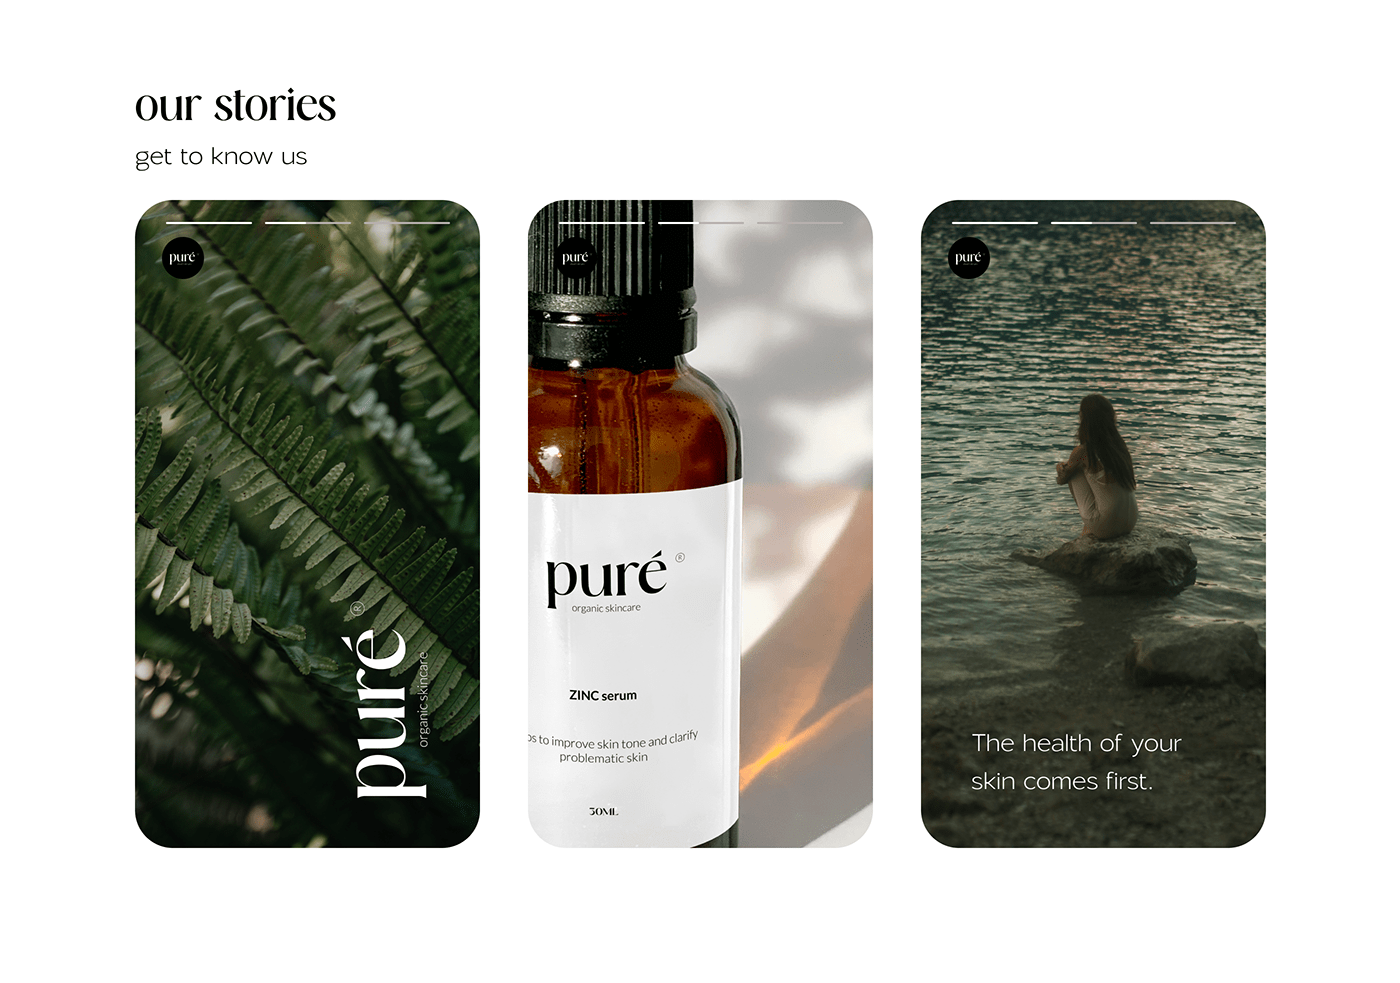 Pure organic nature infused skincare company branding - logo, colors, products, visual materials.